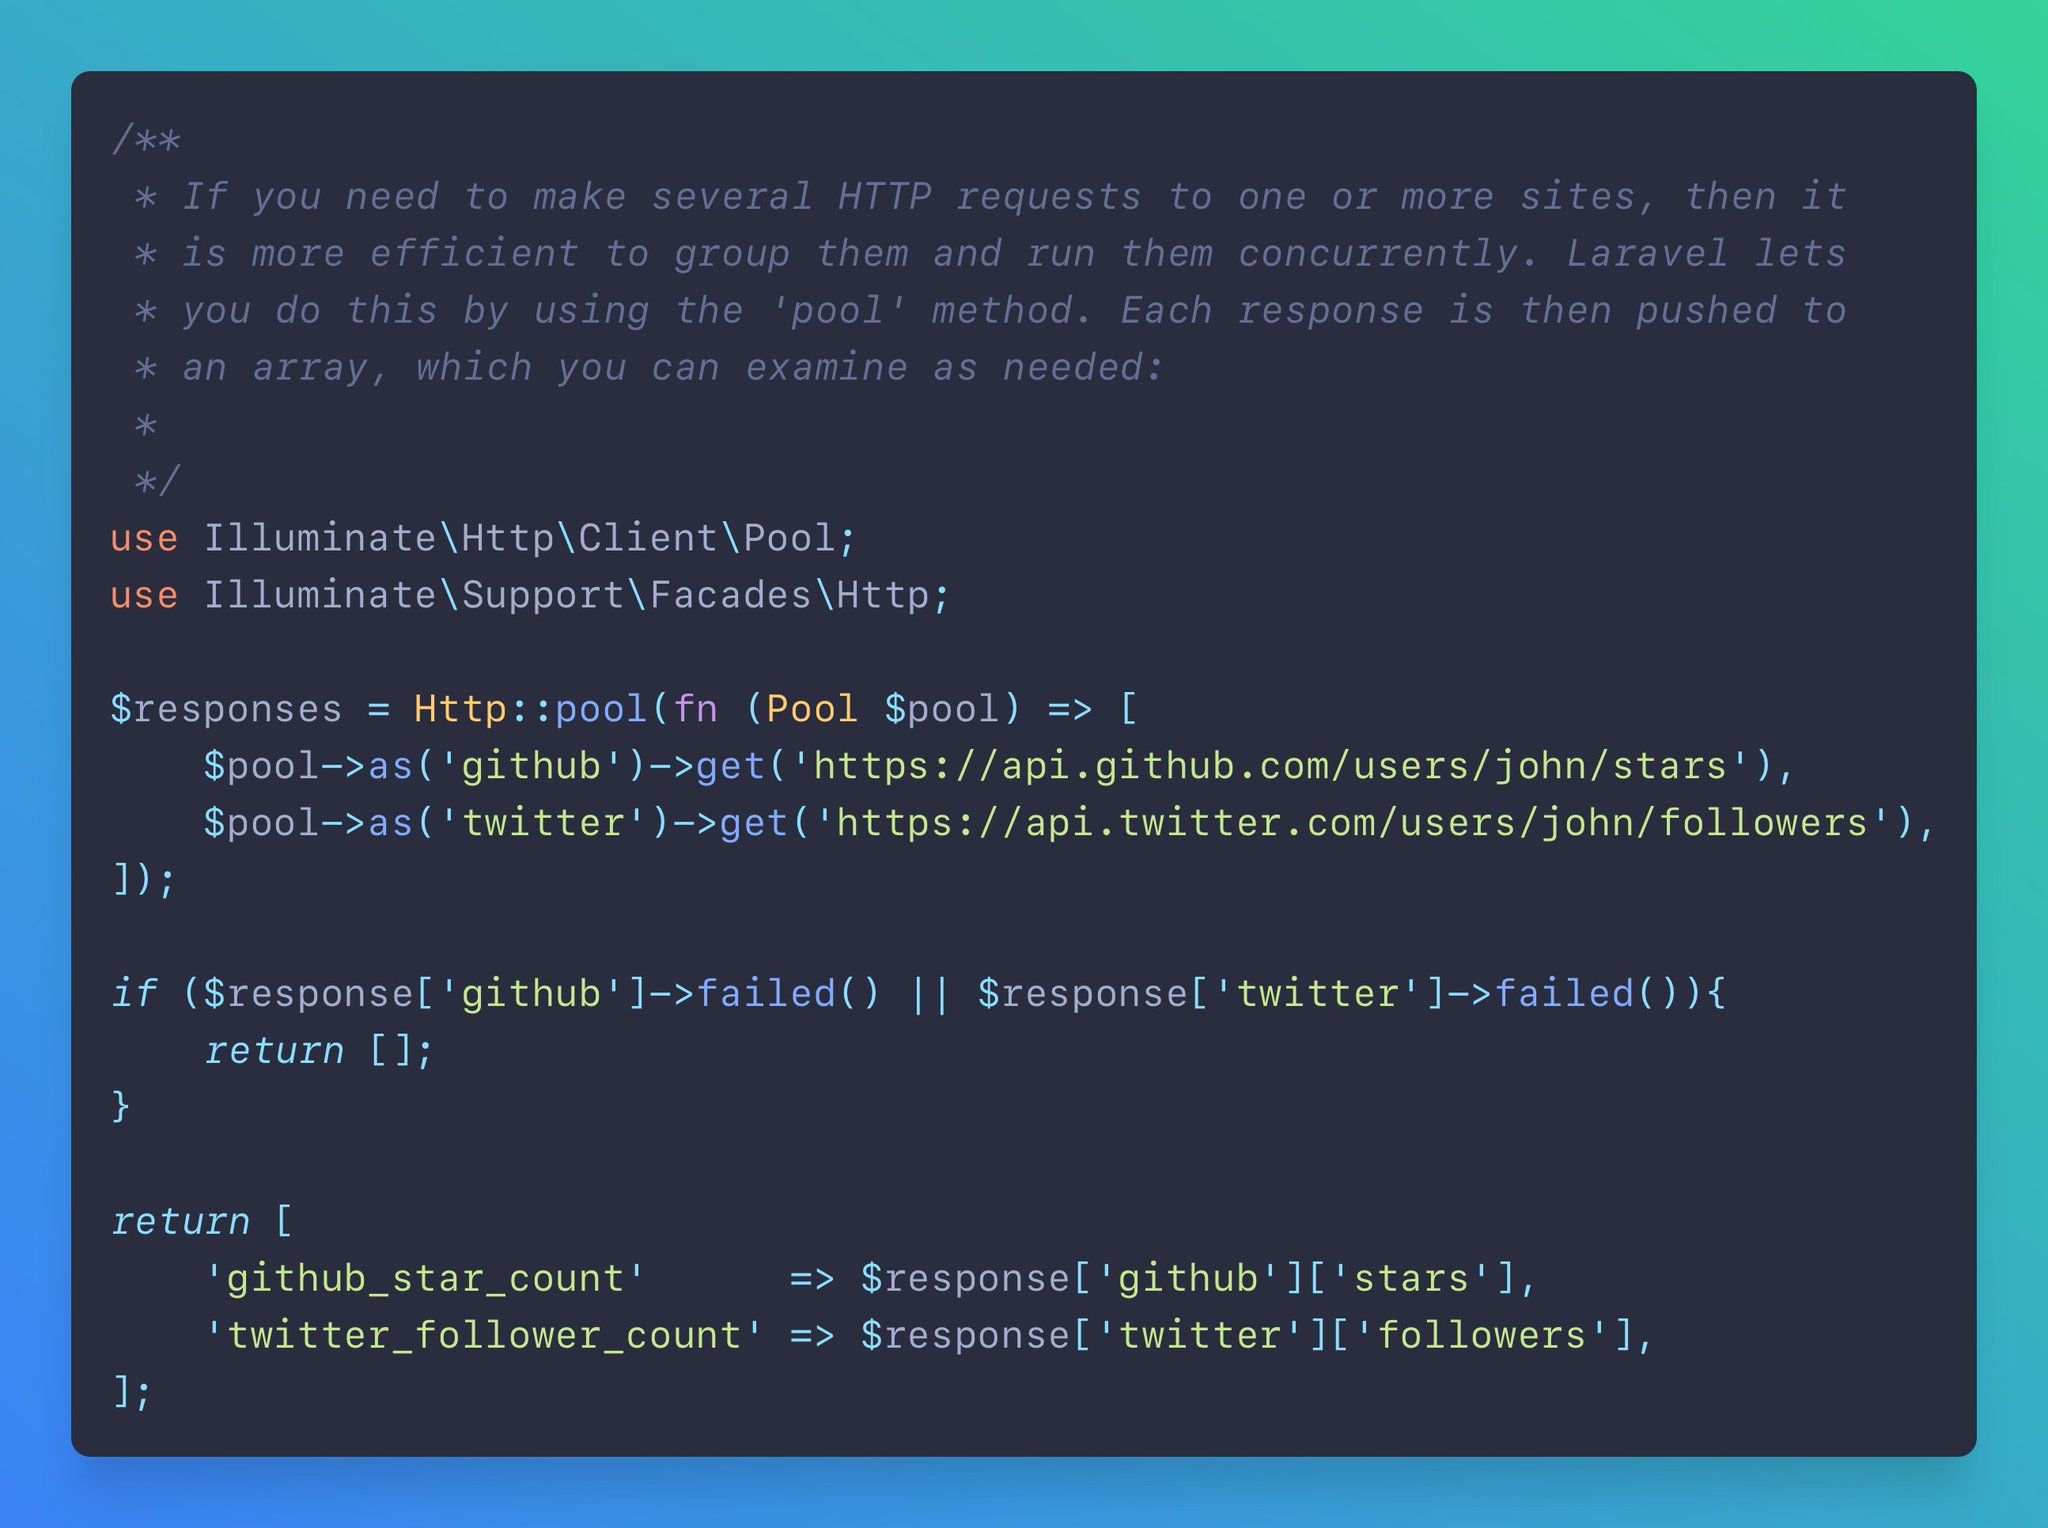 Laravel's Http client supports concurrent requests using the `pool` method